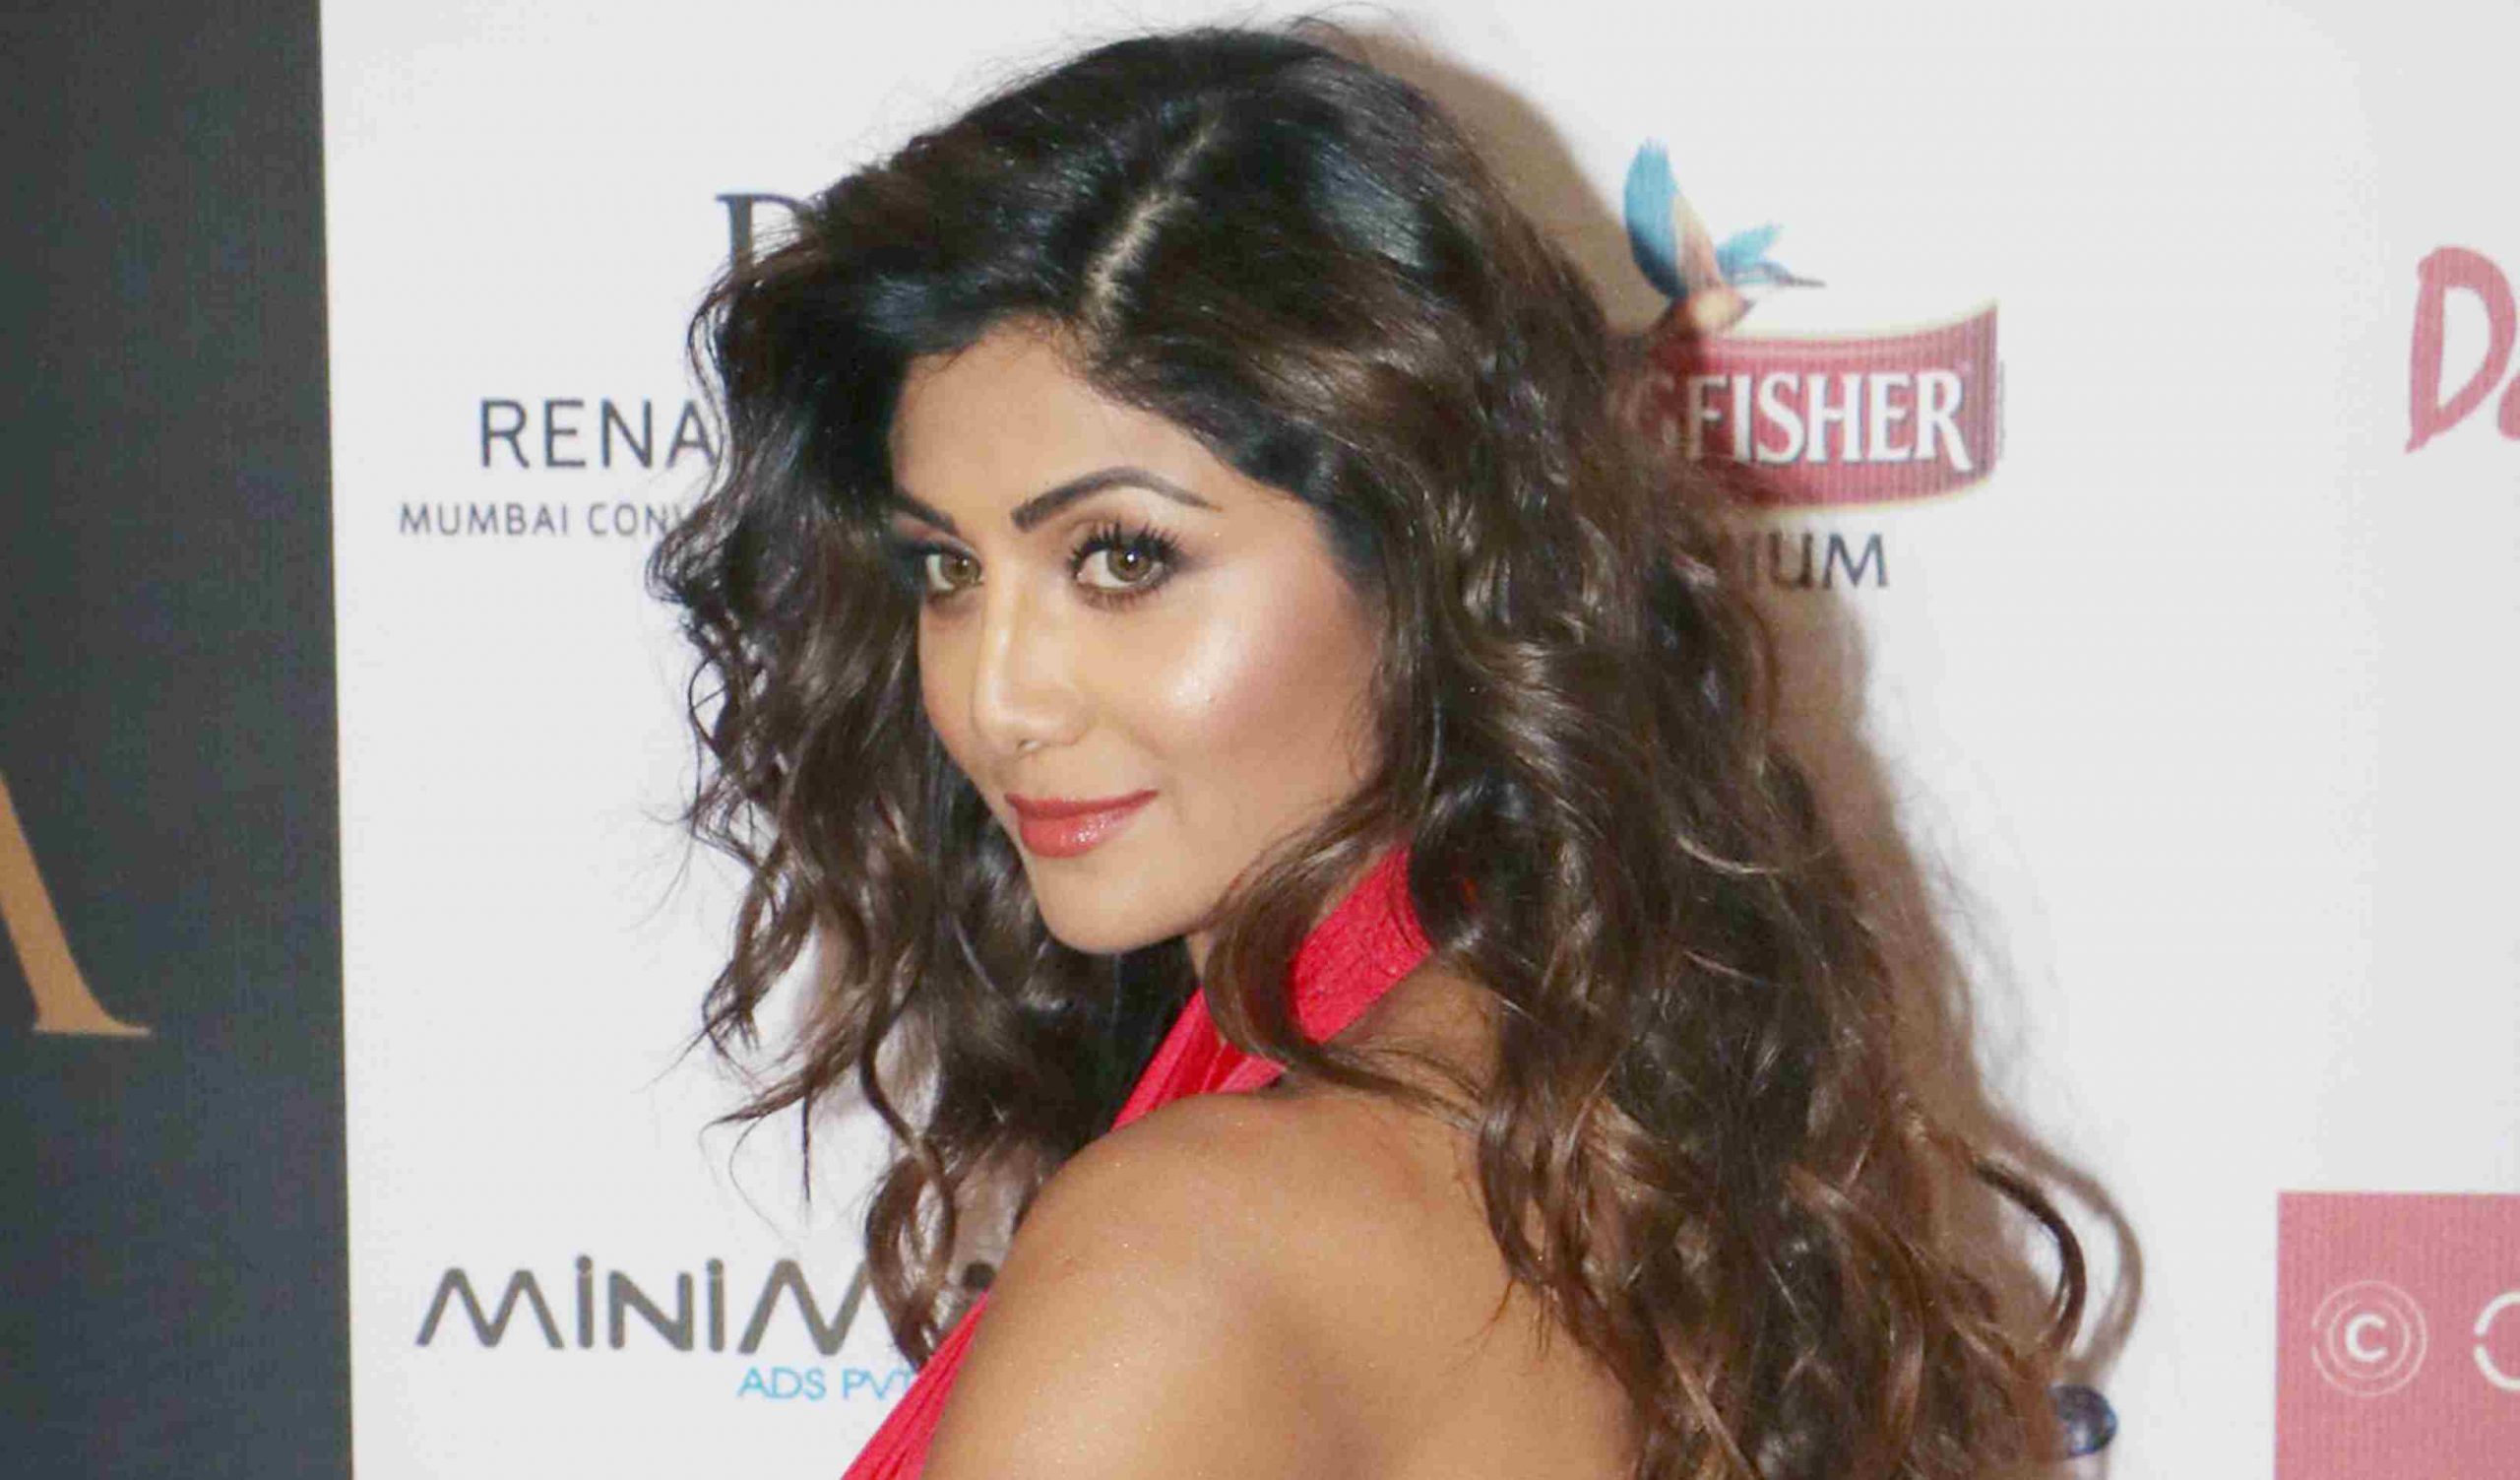 15 Photos That Prove Shilpa Shetty Approves Of A Statement Watch Being A Timeless Accessory